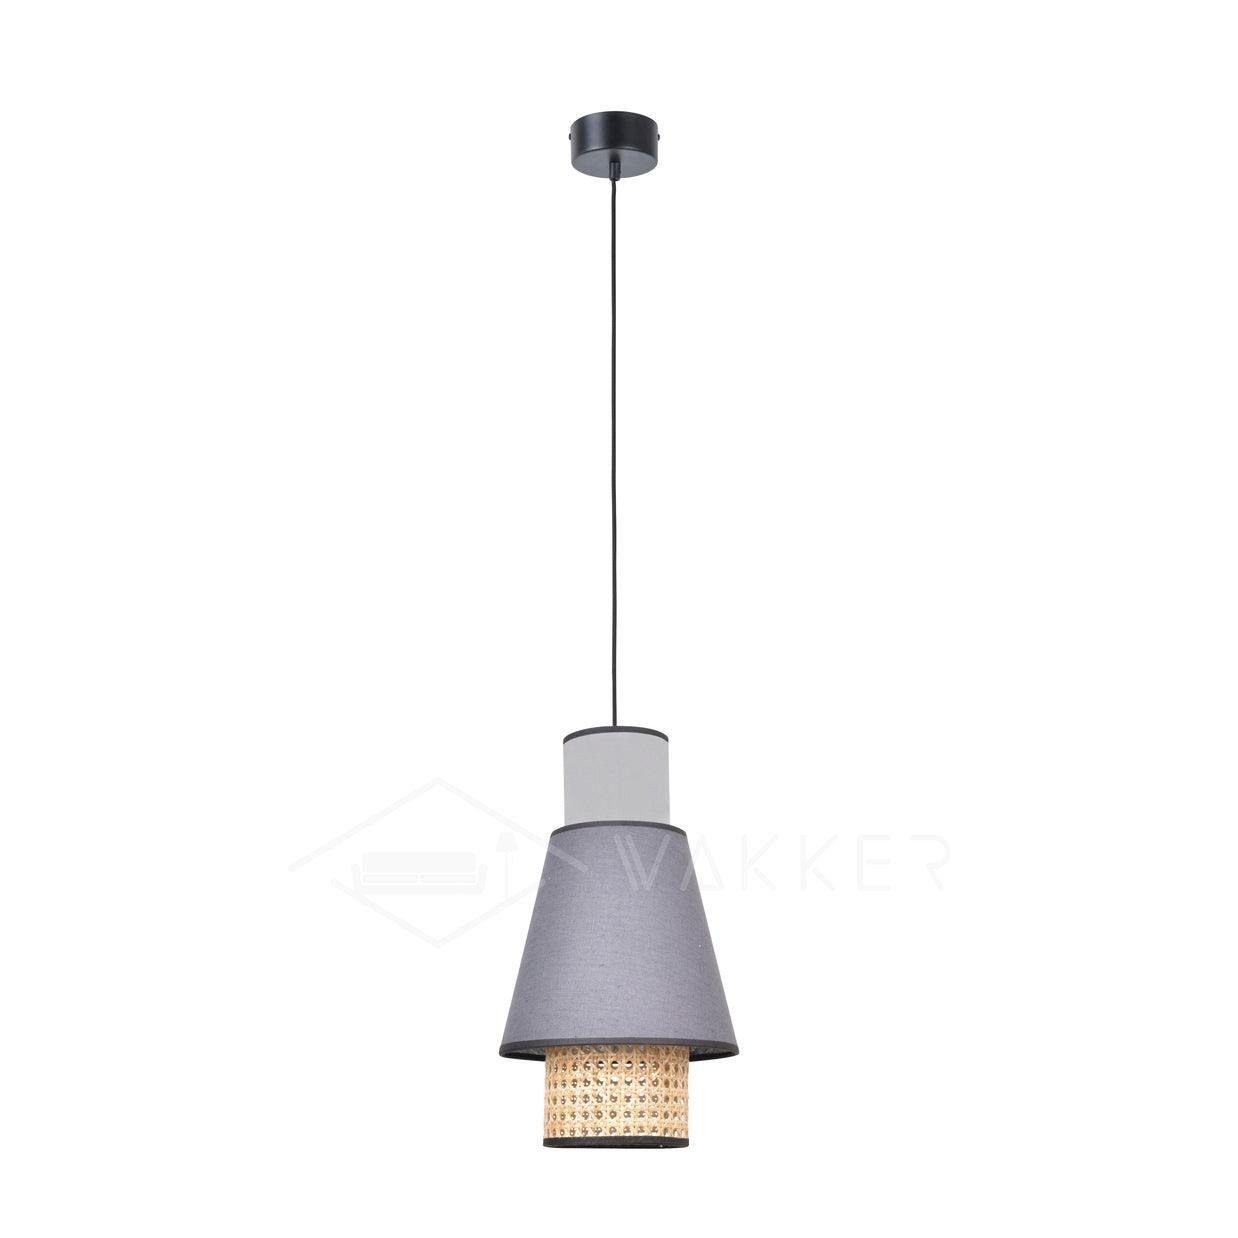 Singapour PM Suspended Lights - Size: 9.8" Diameter x 15.8" Height, 25cm Diameter x 40cm Height - Color: Anthracite or Almond